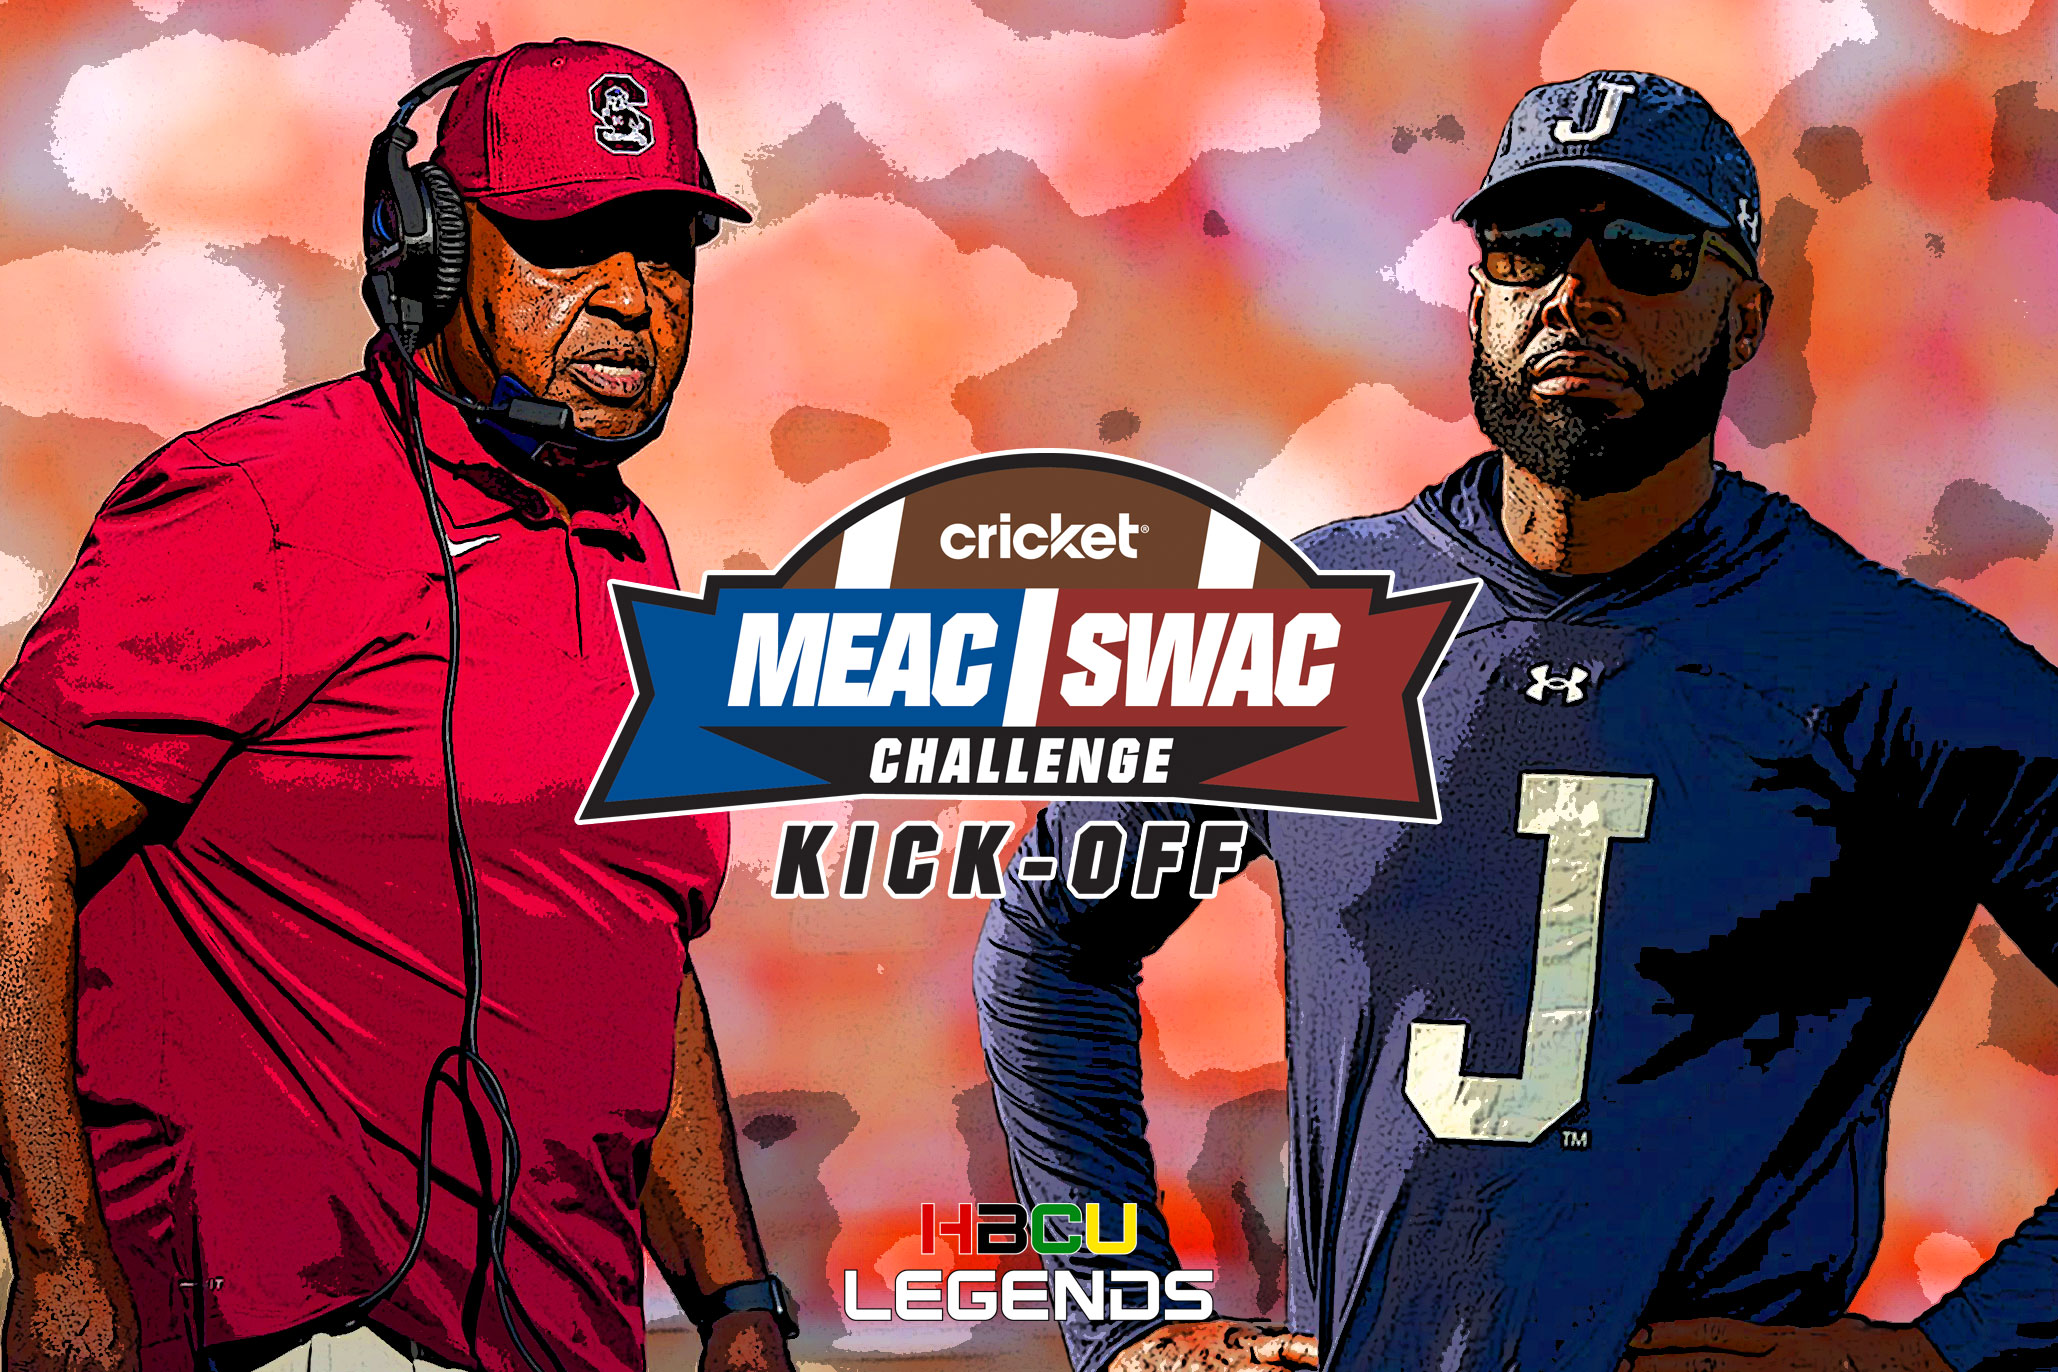 2023 Cricket MEAC/SWAC Challenge How To Watch